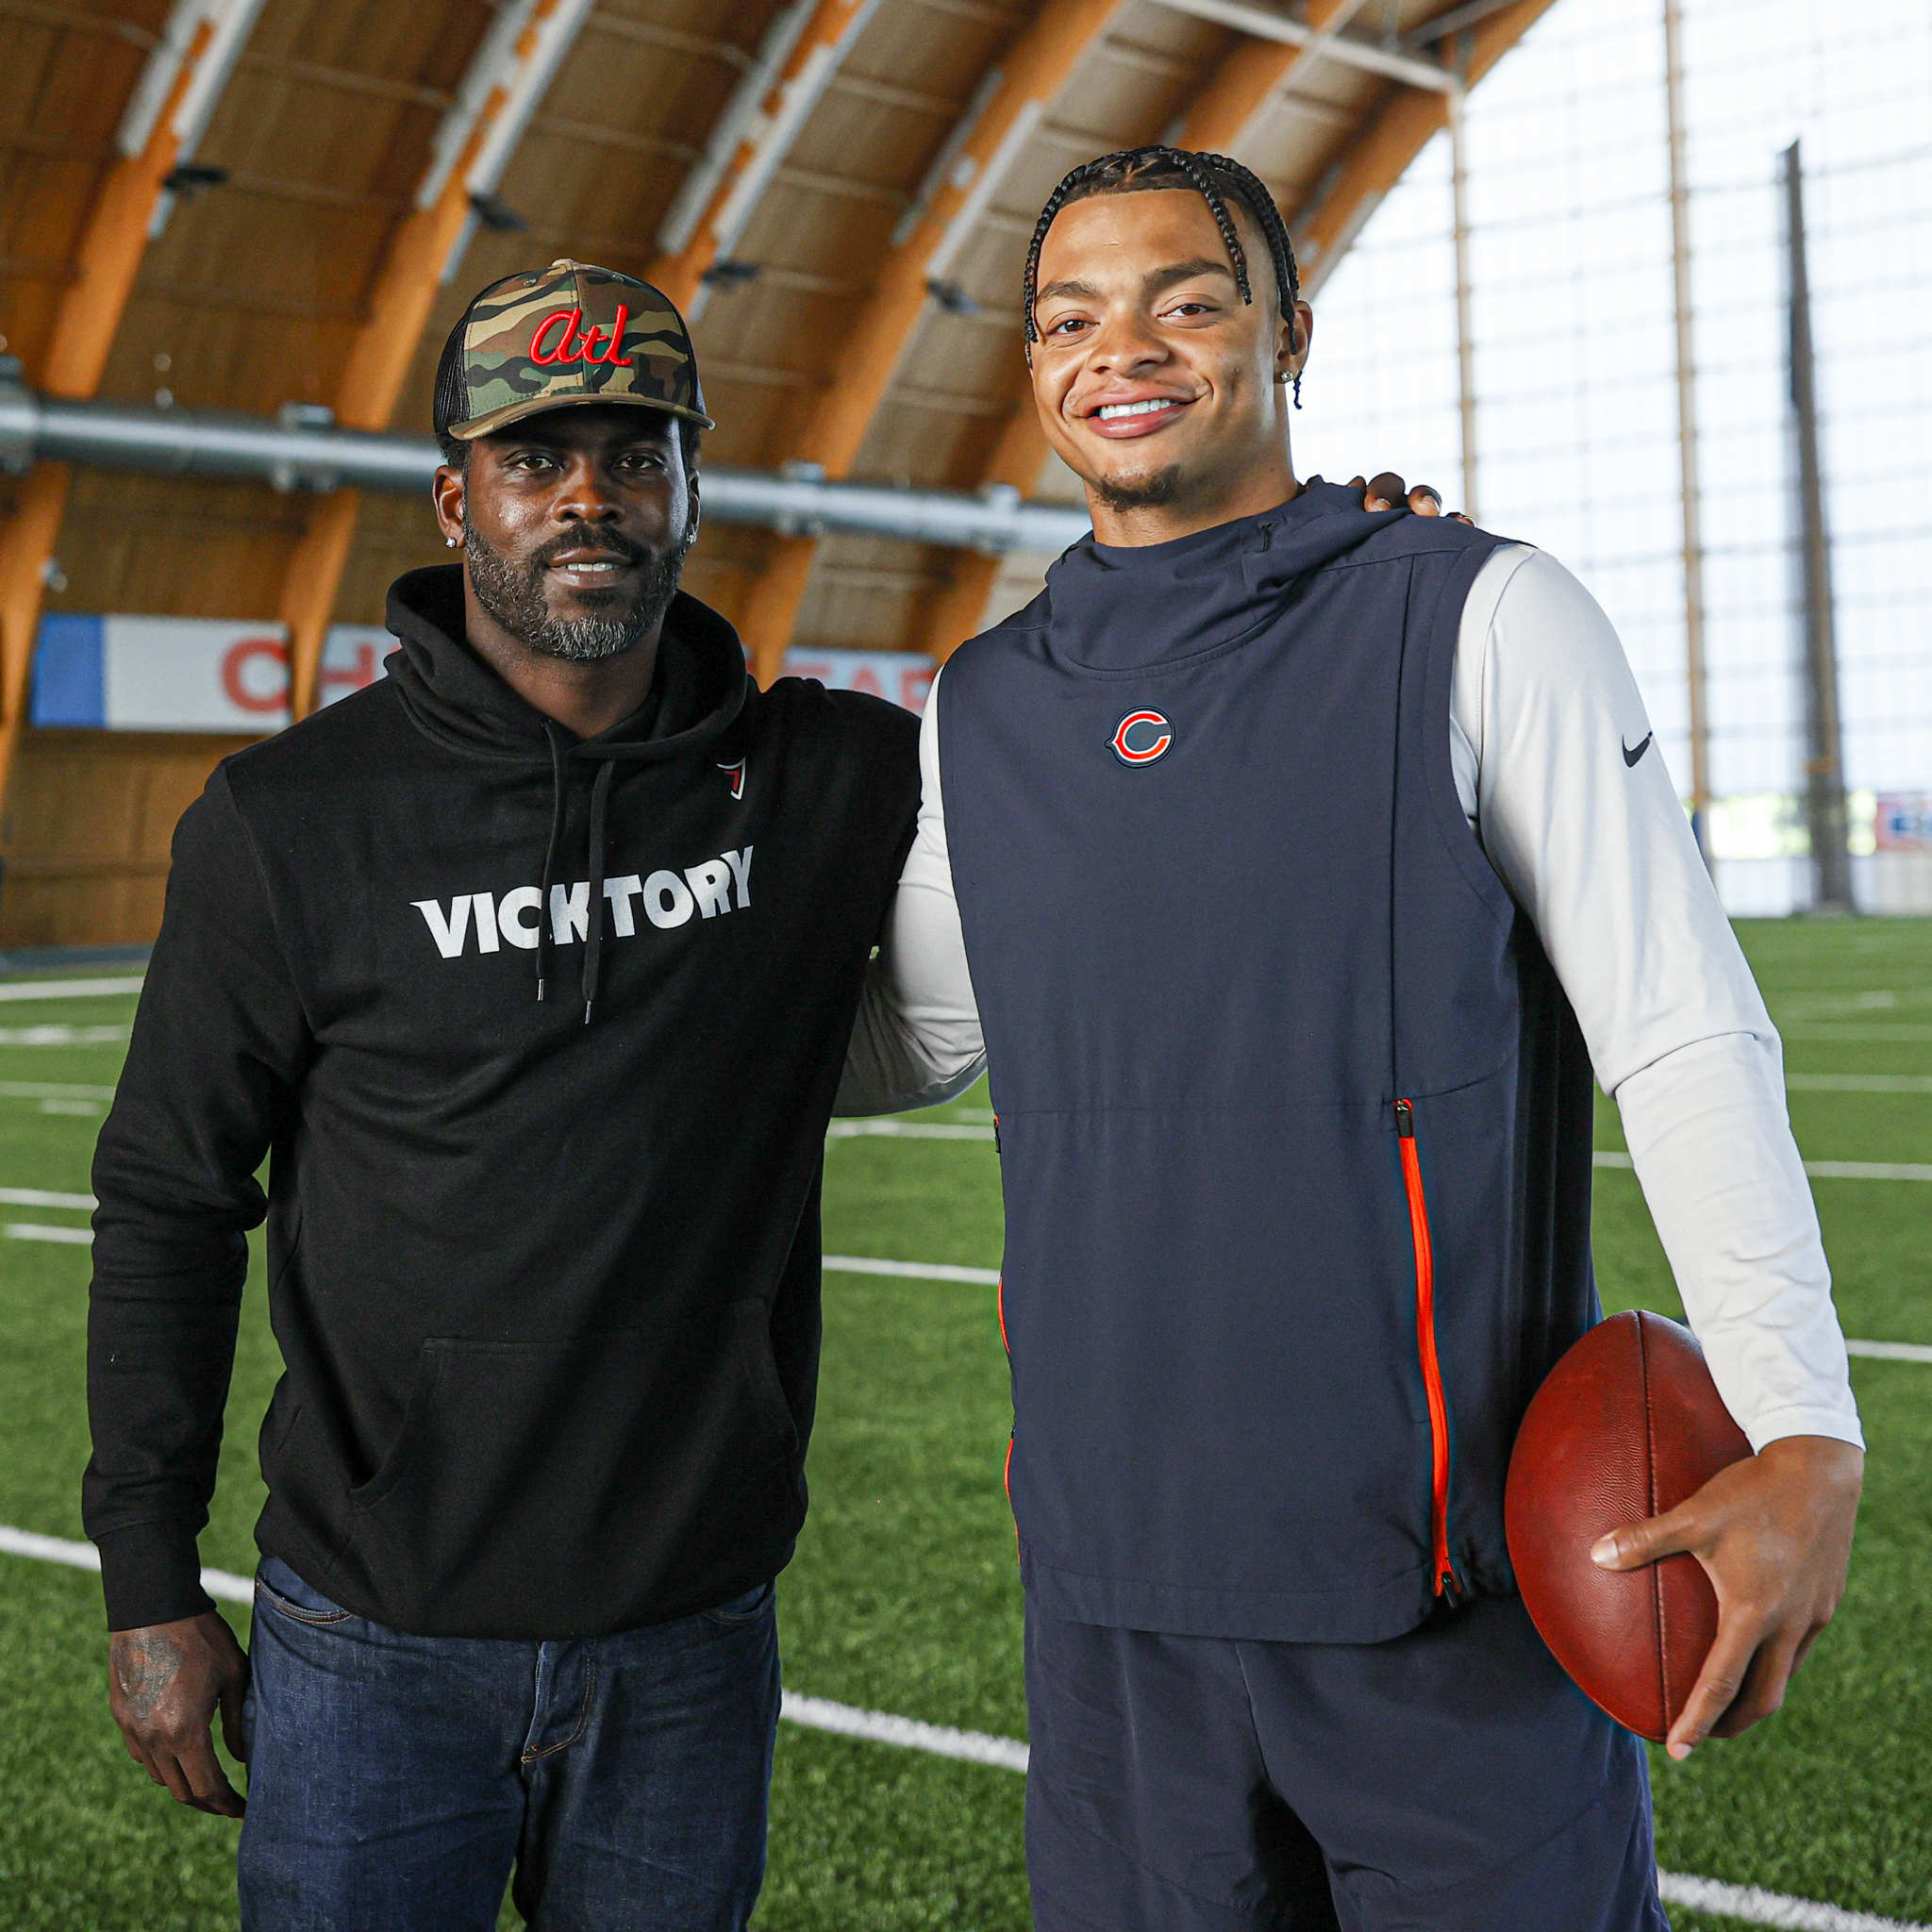 Justin Fields and Michael Vick in the Walter Payton Center - Photo Via: Chicago Bears Twitter - Green Bay Packers